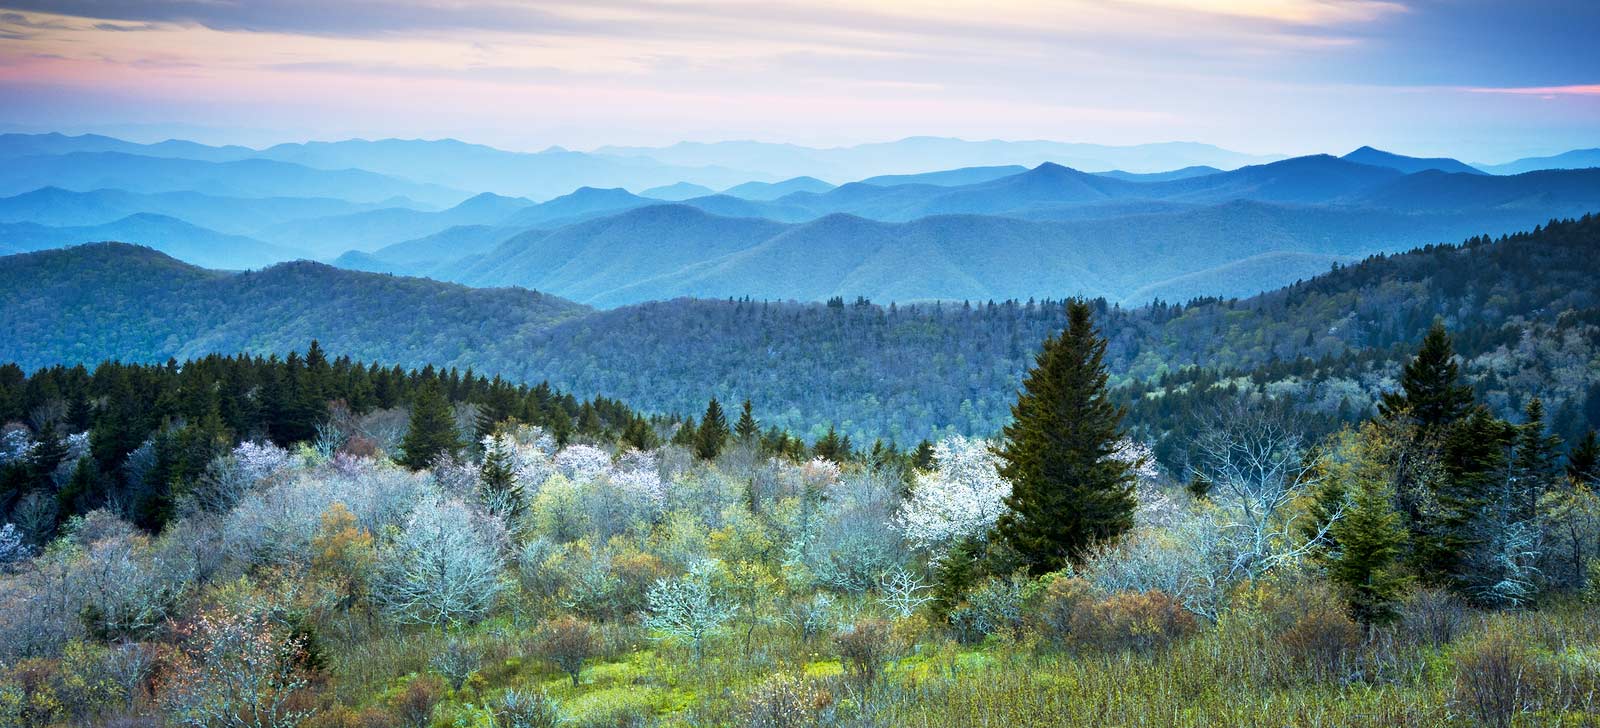 Marvel at the Blue Ridge Mountains with Canyon Calling Adventure Tours